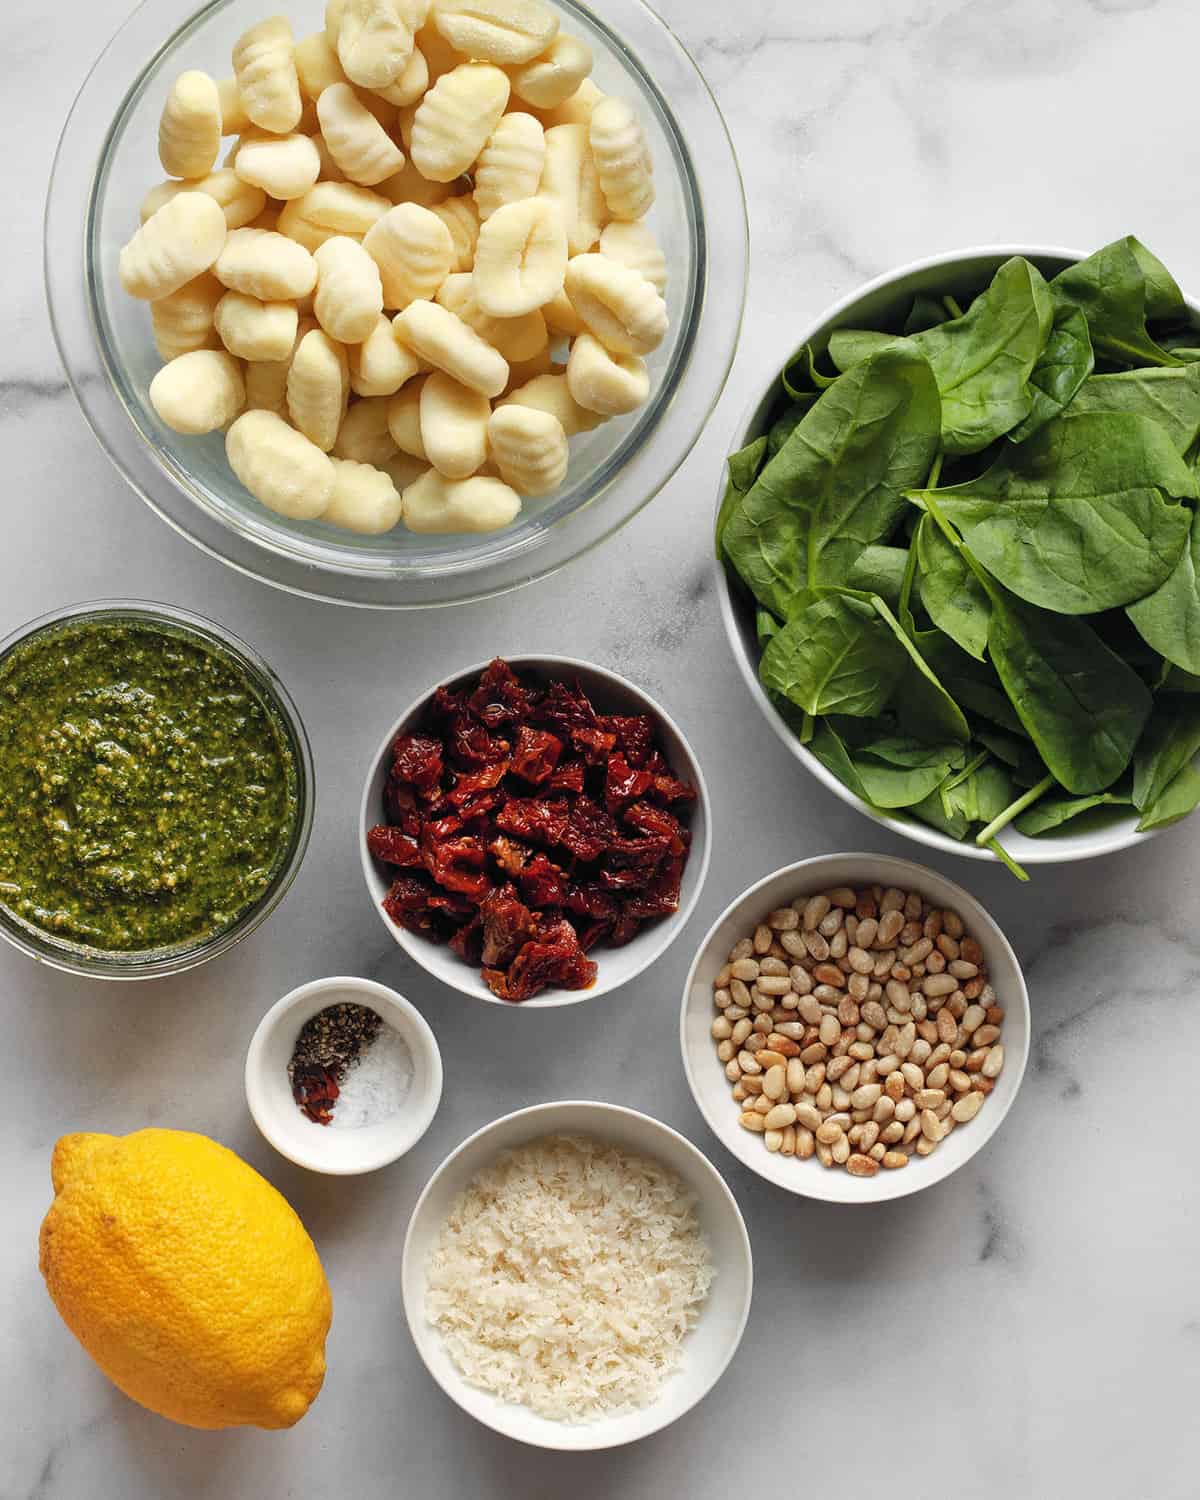 Ingredients including gnocchi, pesto, sun dried tomatoes, spinach, pine nuts, Parmesan, lemon